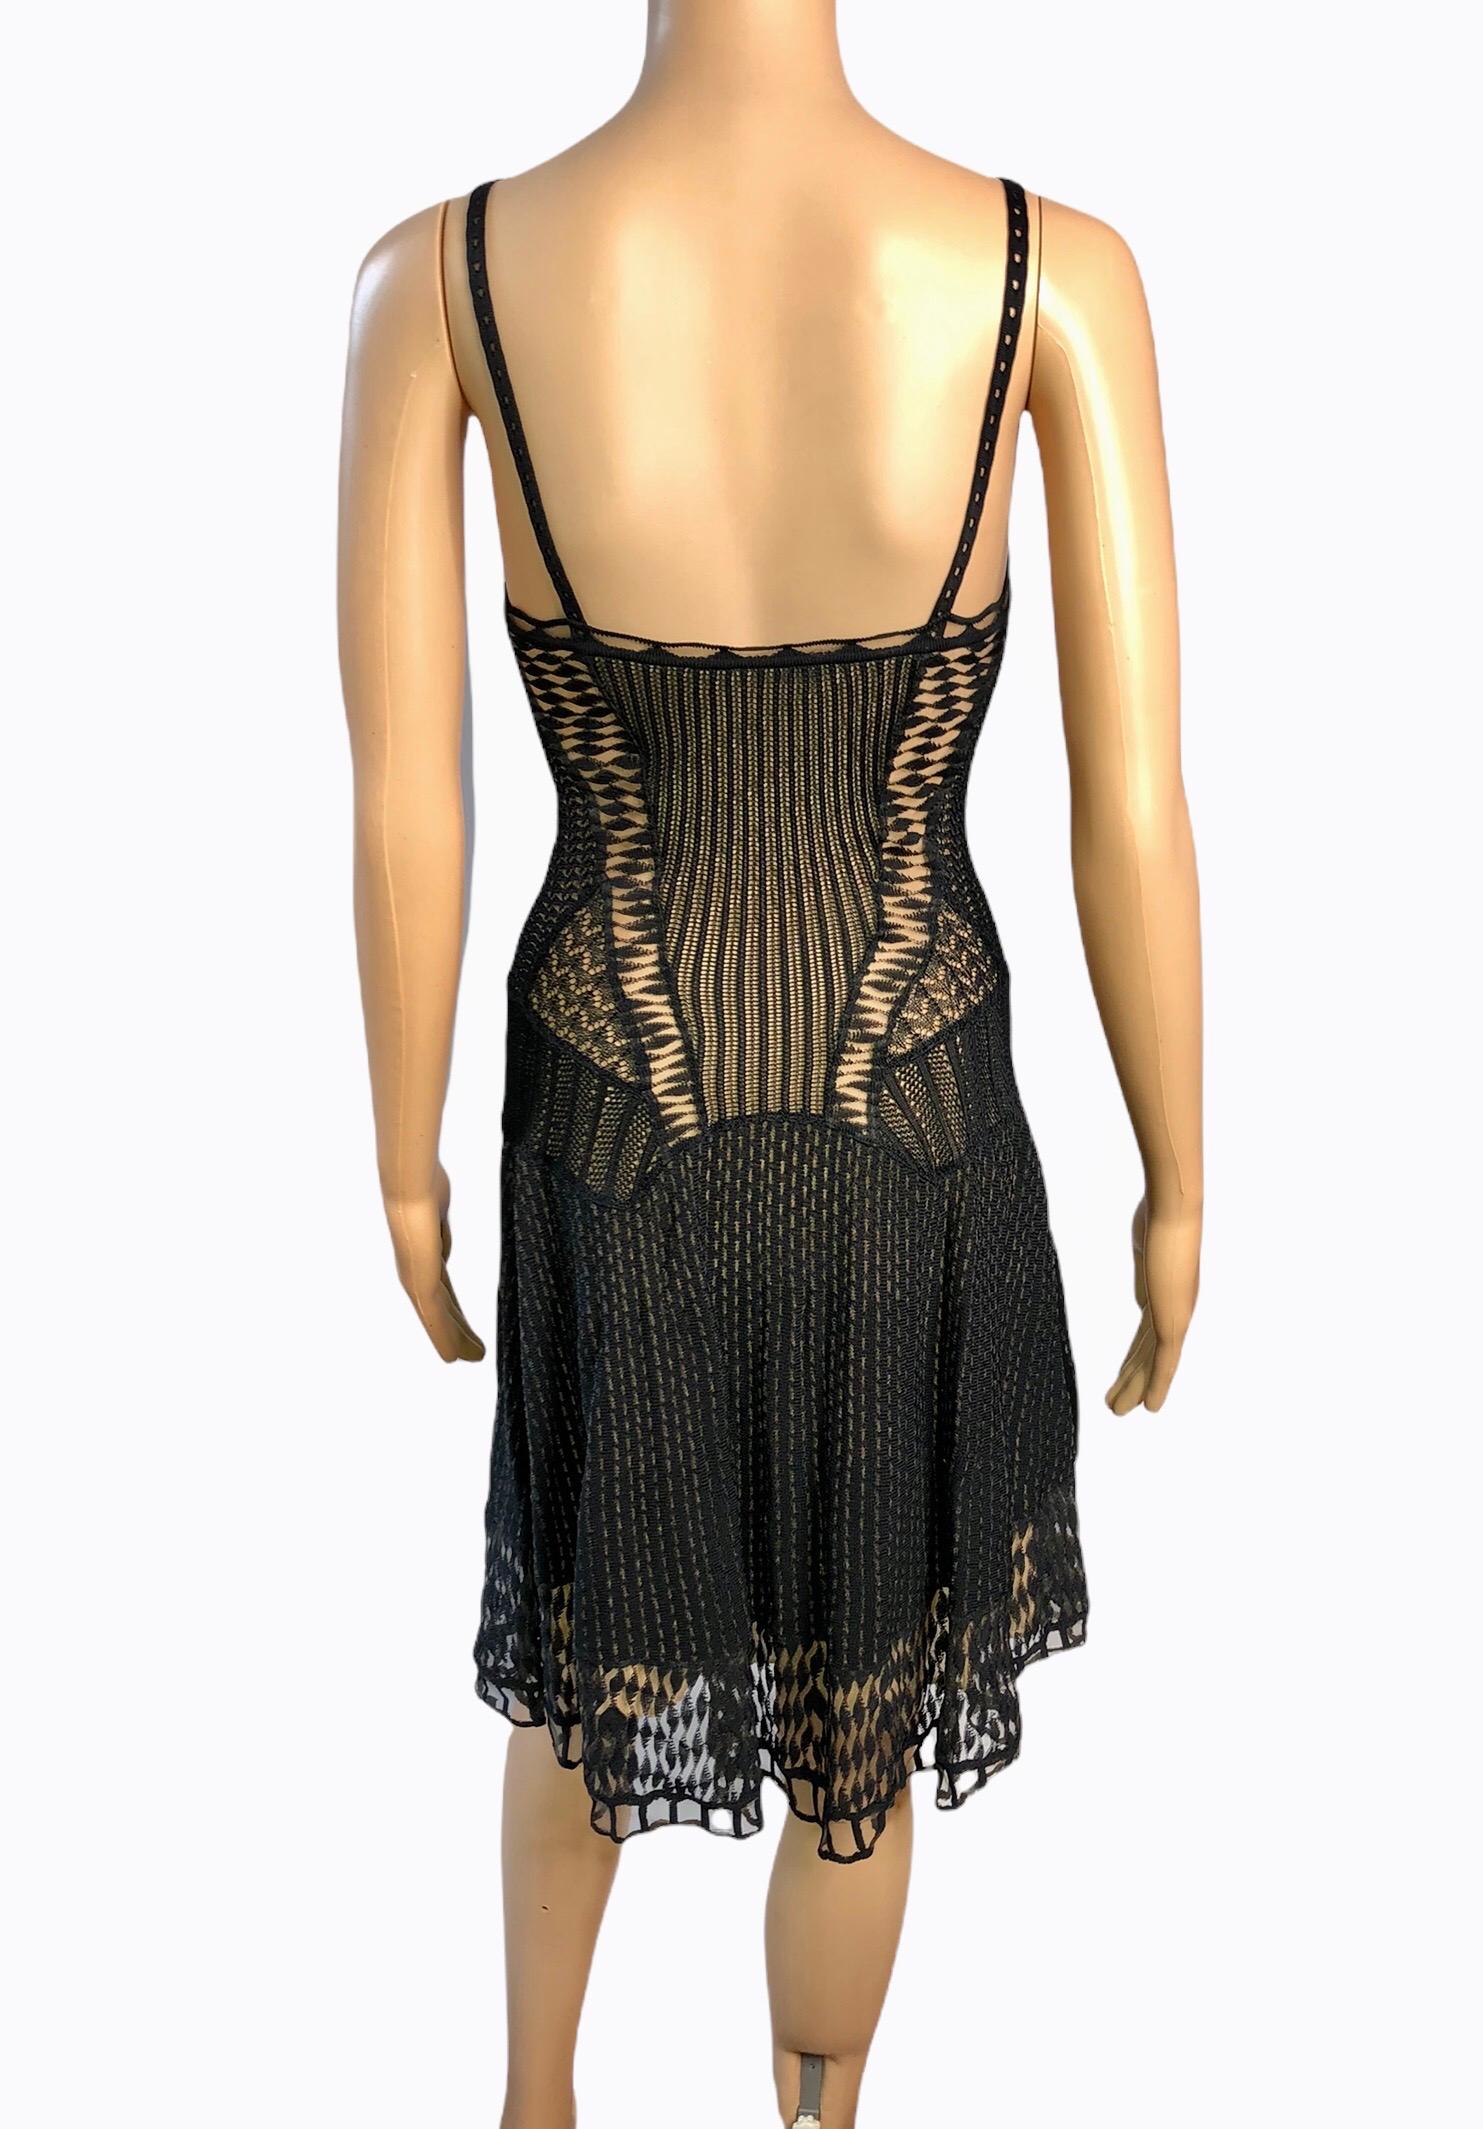 Christian Dior by John Galliano S/S 2009 Bustier Sheer Lace Knit Black Dress 2